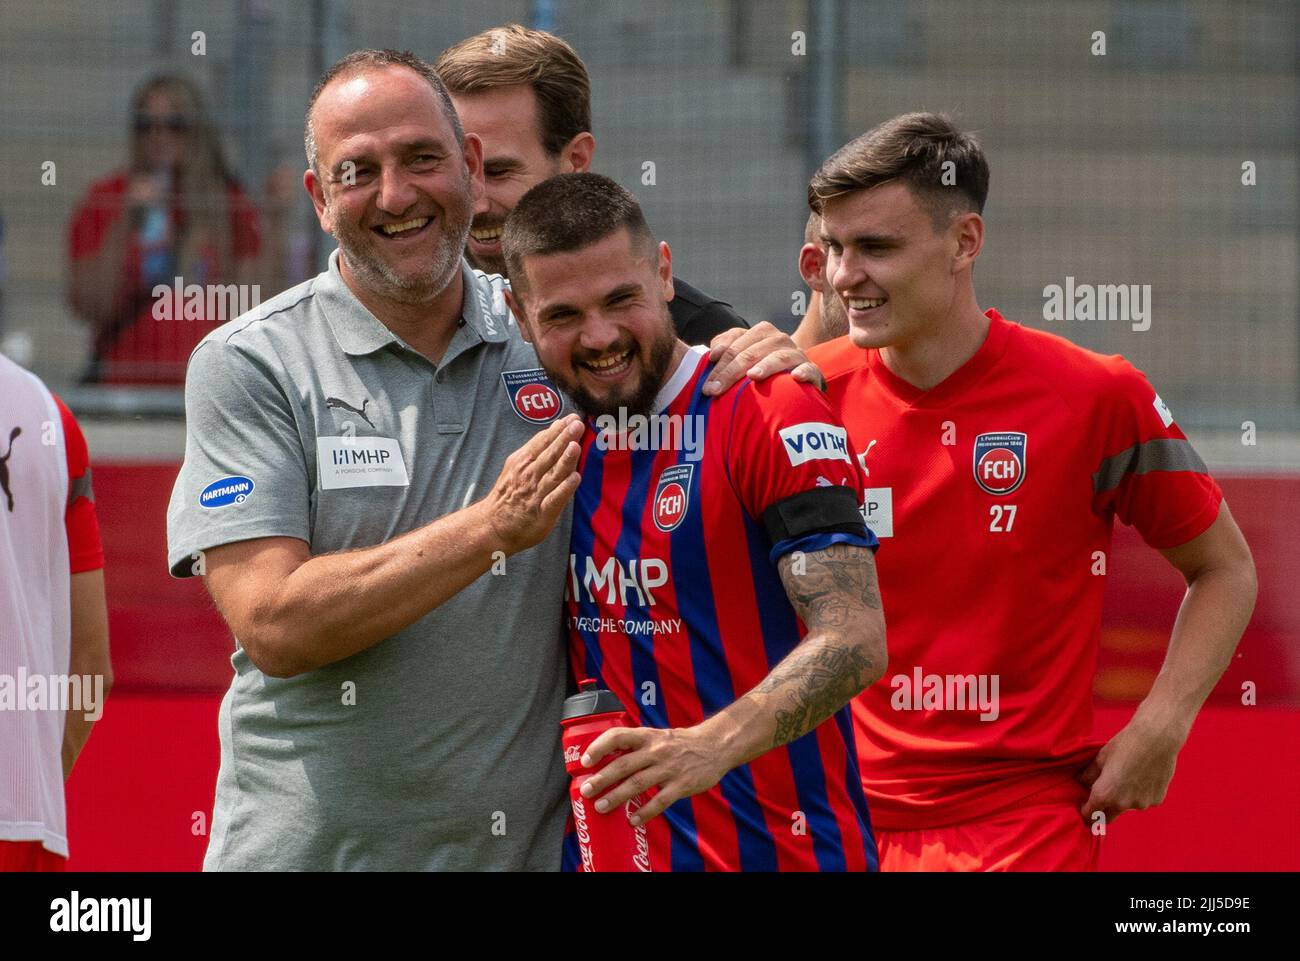 Heidenheim, Germany. 23rd July, 2022. Soccer: 2nd Bundesliga, 1st FC Heidenheim - Eintracht Braunschweig, Matchday 2, Voith Arena. Heidenheim coach Frank Schmidt (l) laughingly embraces Marnon Busch. Credit: Stefan Puchner/dpa - IMPORTANT NOTE: In accordance with the requirements of the DFL Deutsche Fußball Liga and the DFB Deutscher Fußball-Bund, it is prohibited to use or have used photographs taken in the stadium and/or of the match in the form of sequence pictures and/or video-like photo series./dpa/Alamy Live News Stock Photo